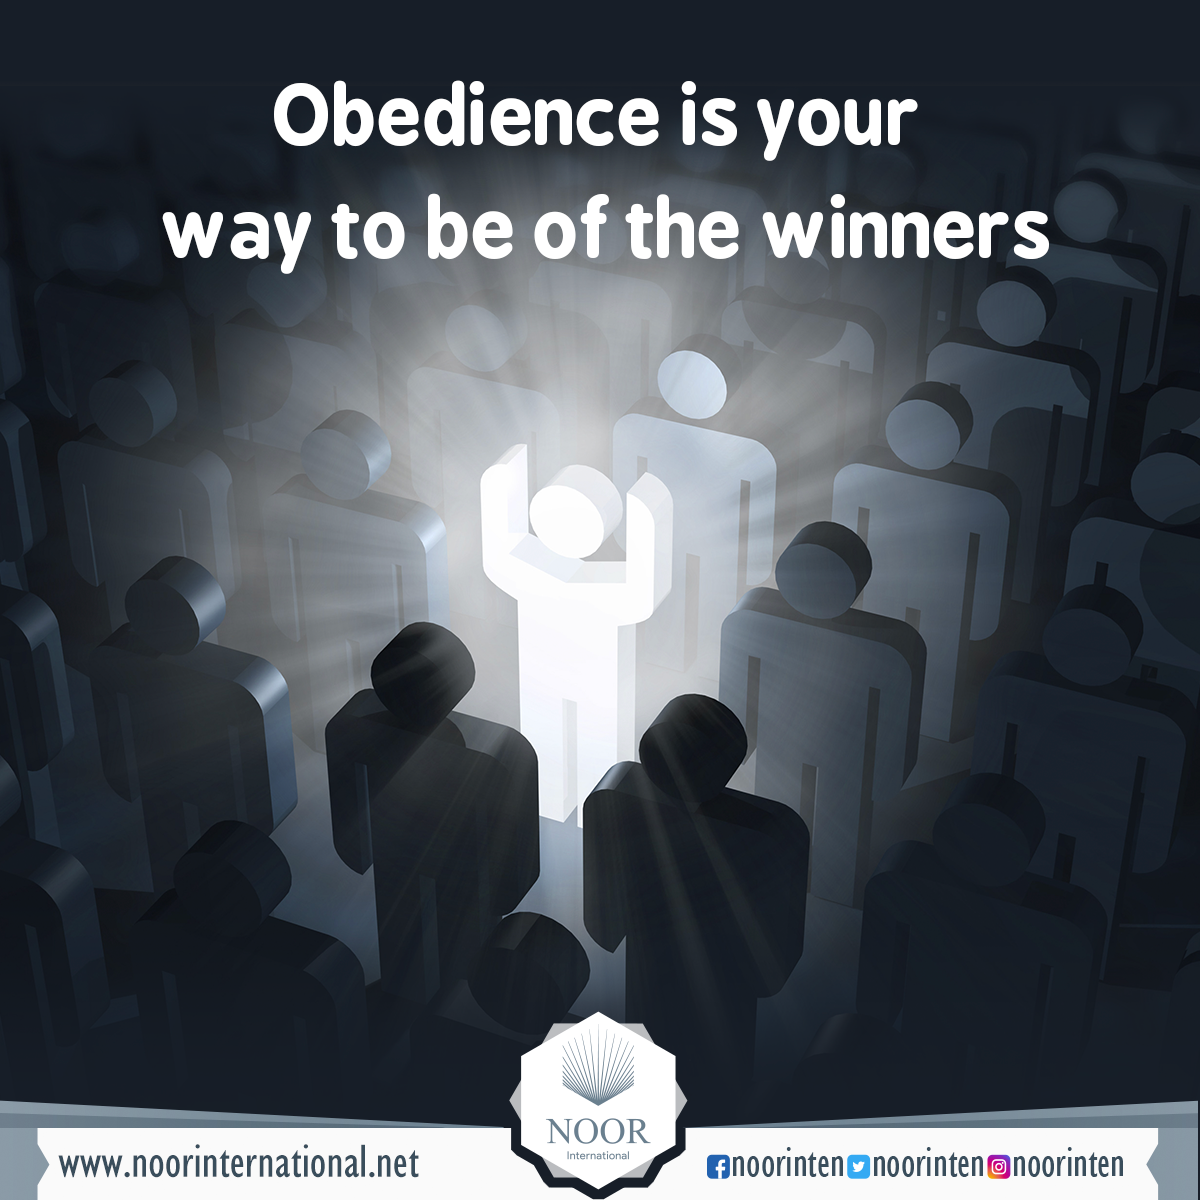 Obedience is your way to be of the winners